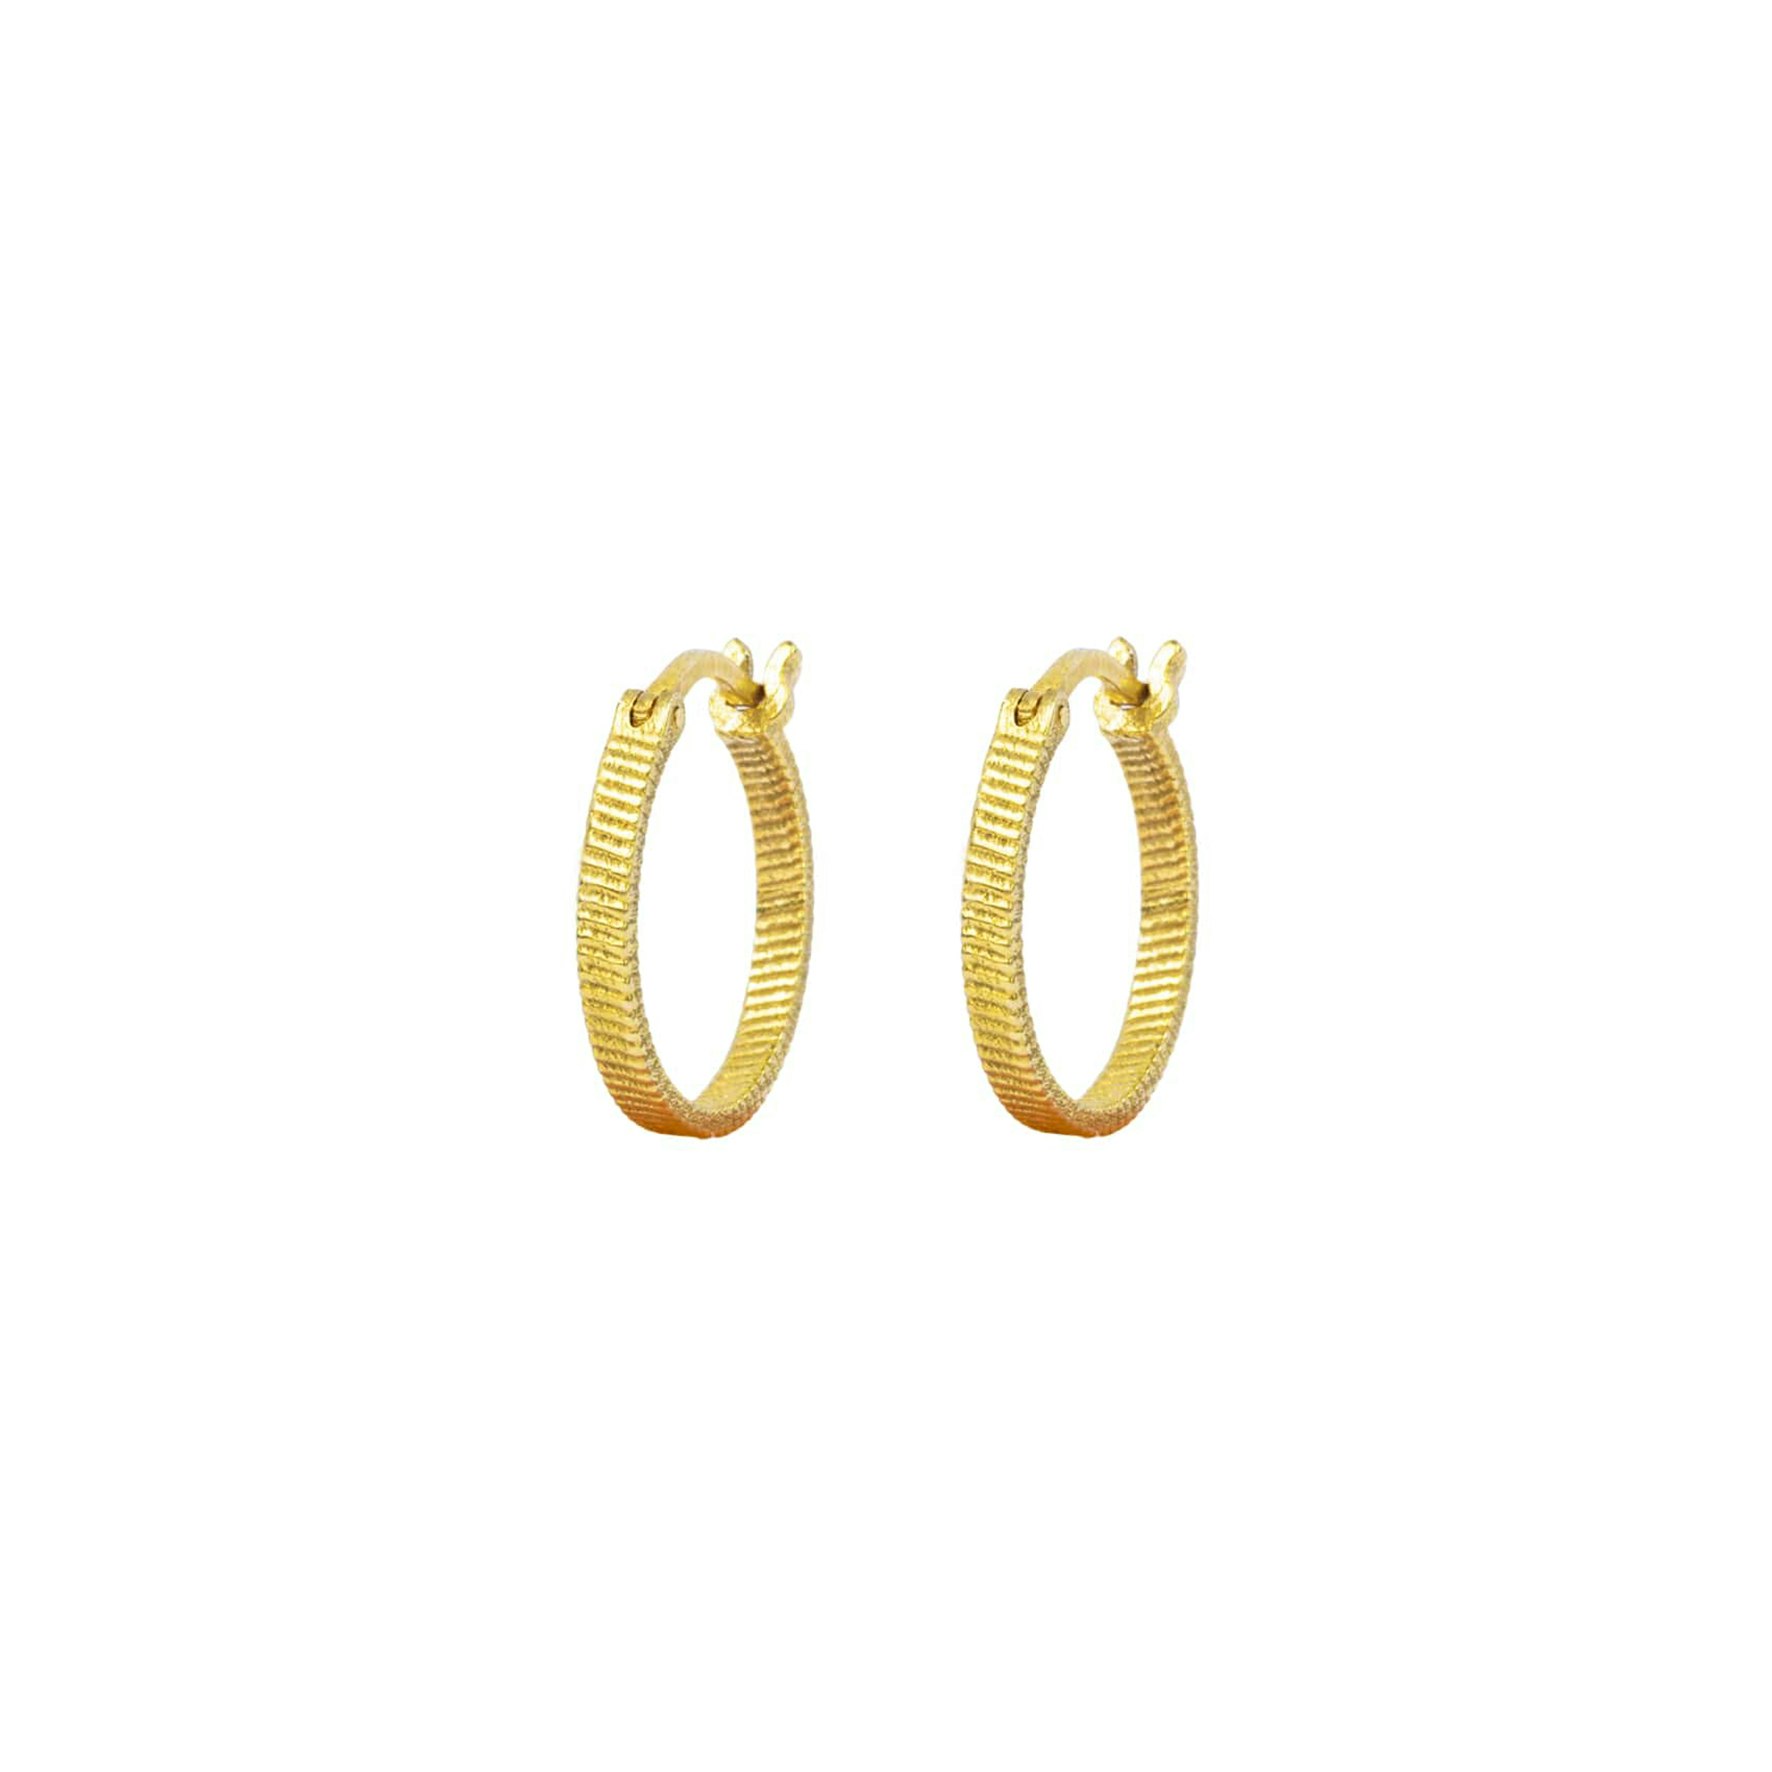 Fortune Teller Hoops Medium from House Of Vincent in Goldplated-Silver Sterling 925